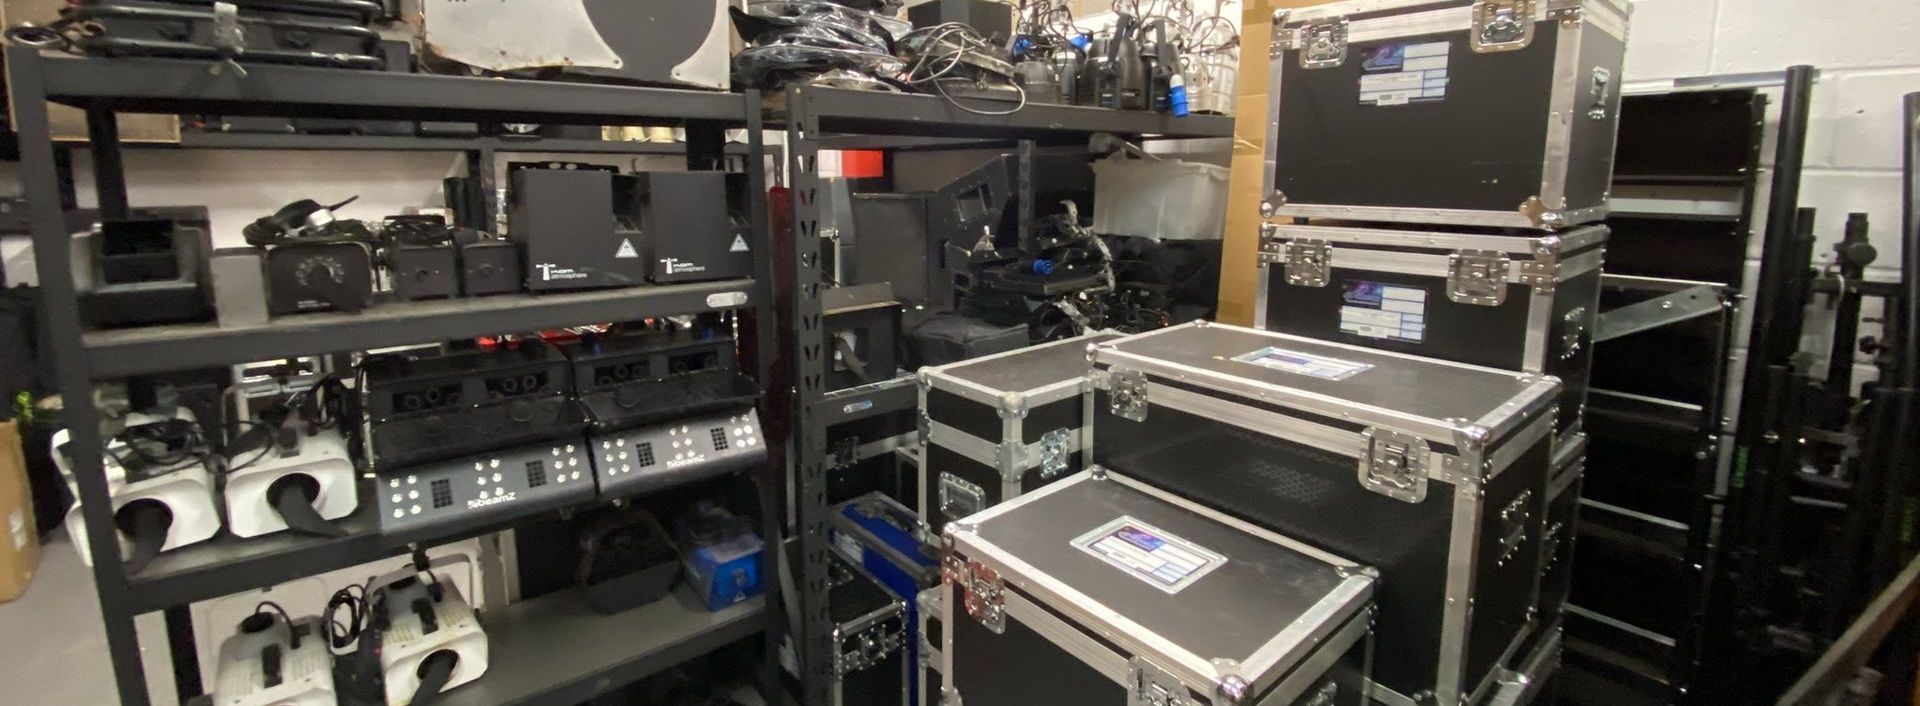 A photo of the inside of a warehouse, with equipment stacked on shelves and flight cases in the foreground.